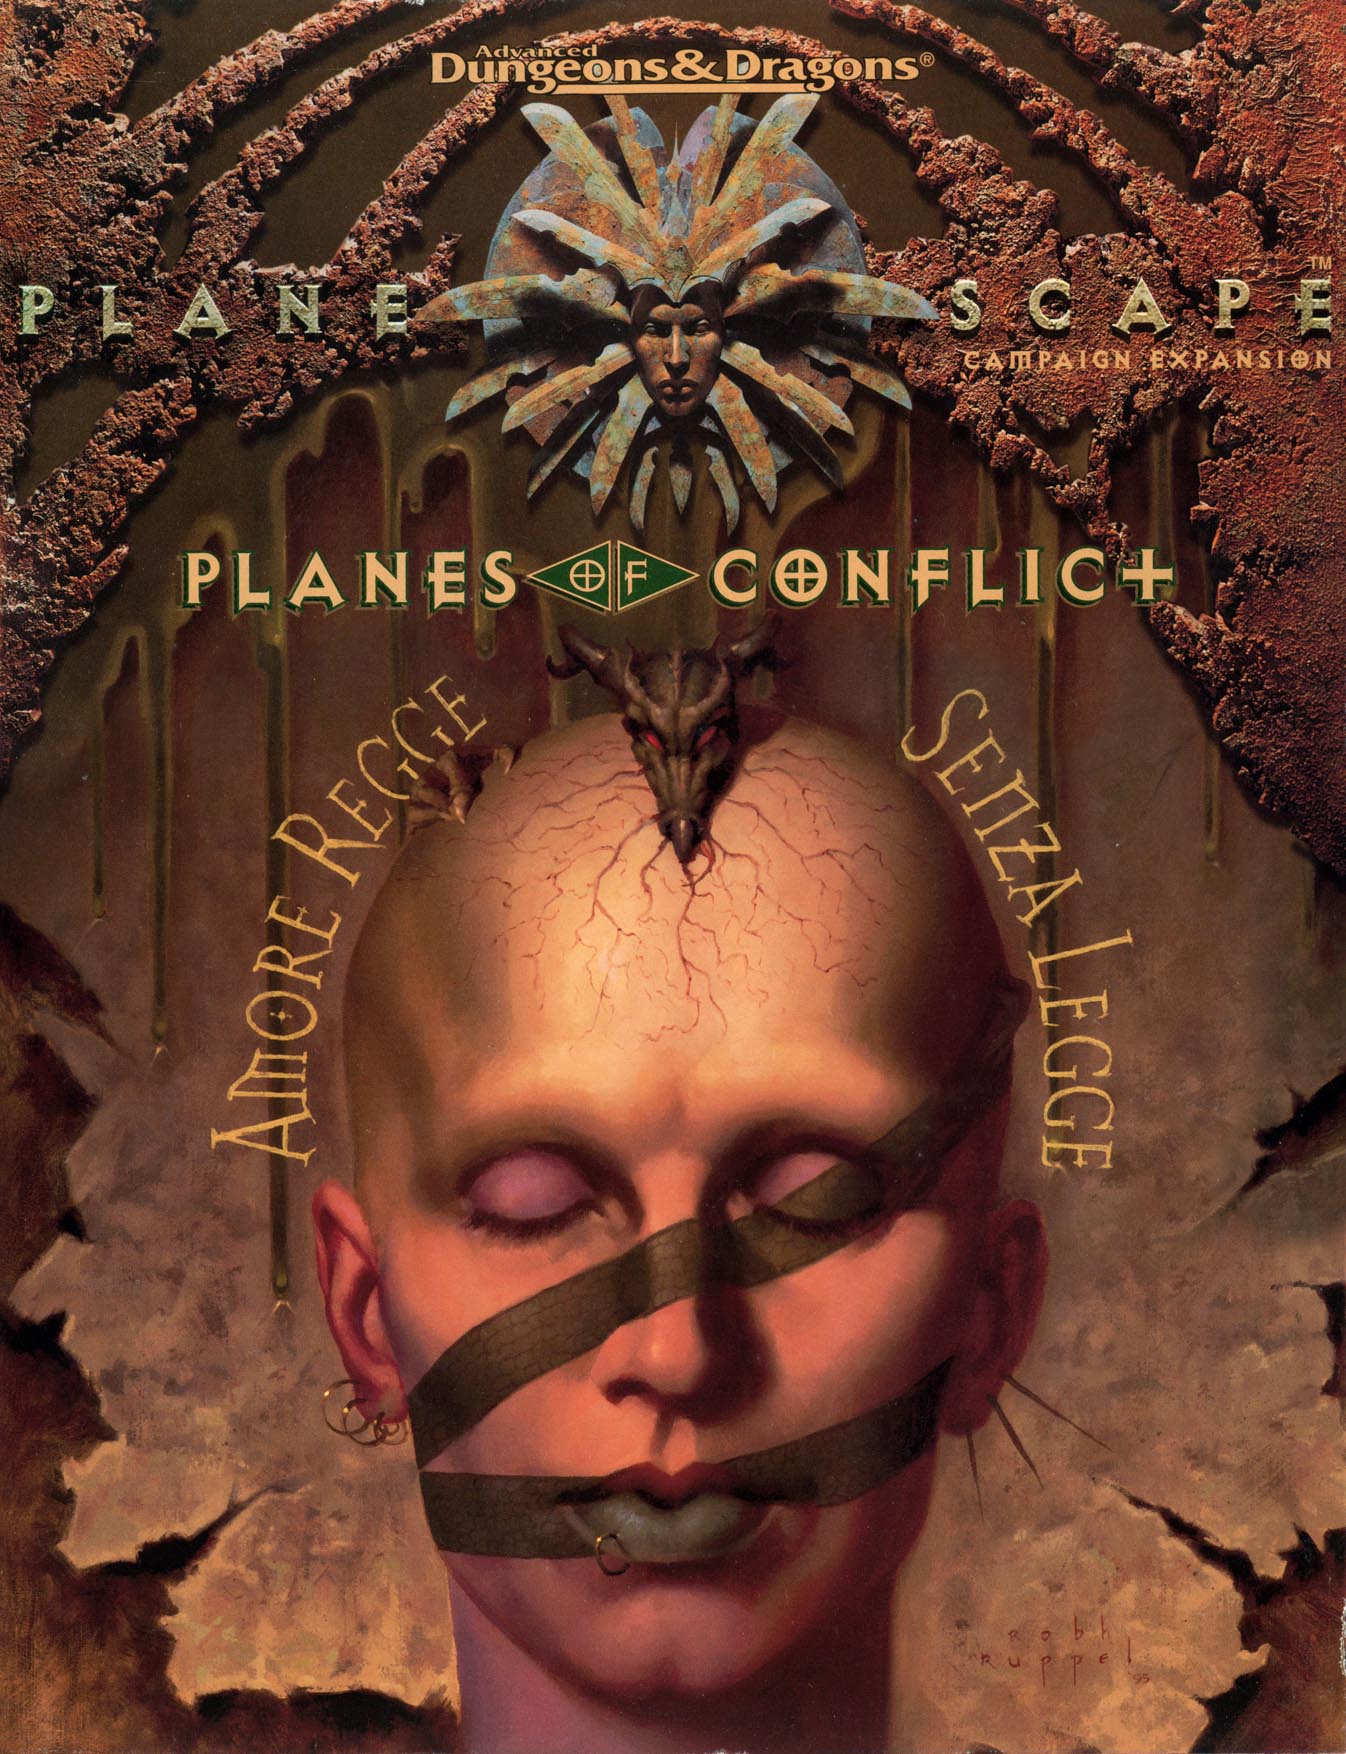 Planes of ConflictCover art